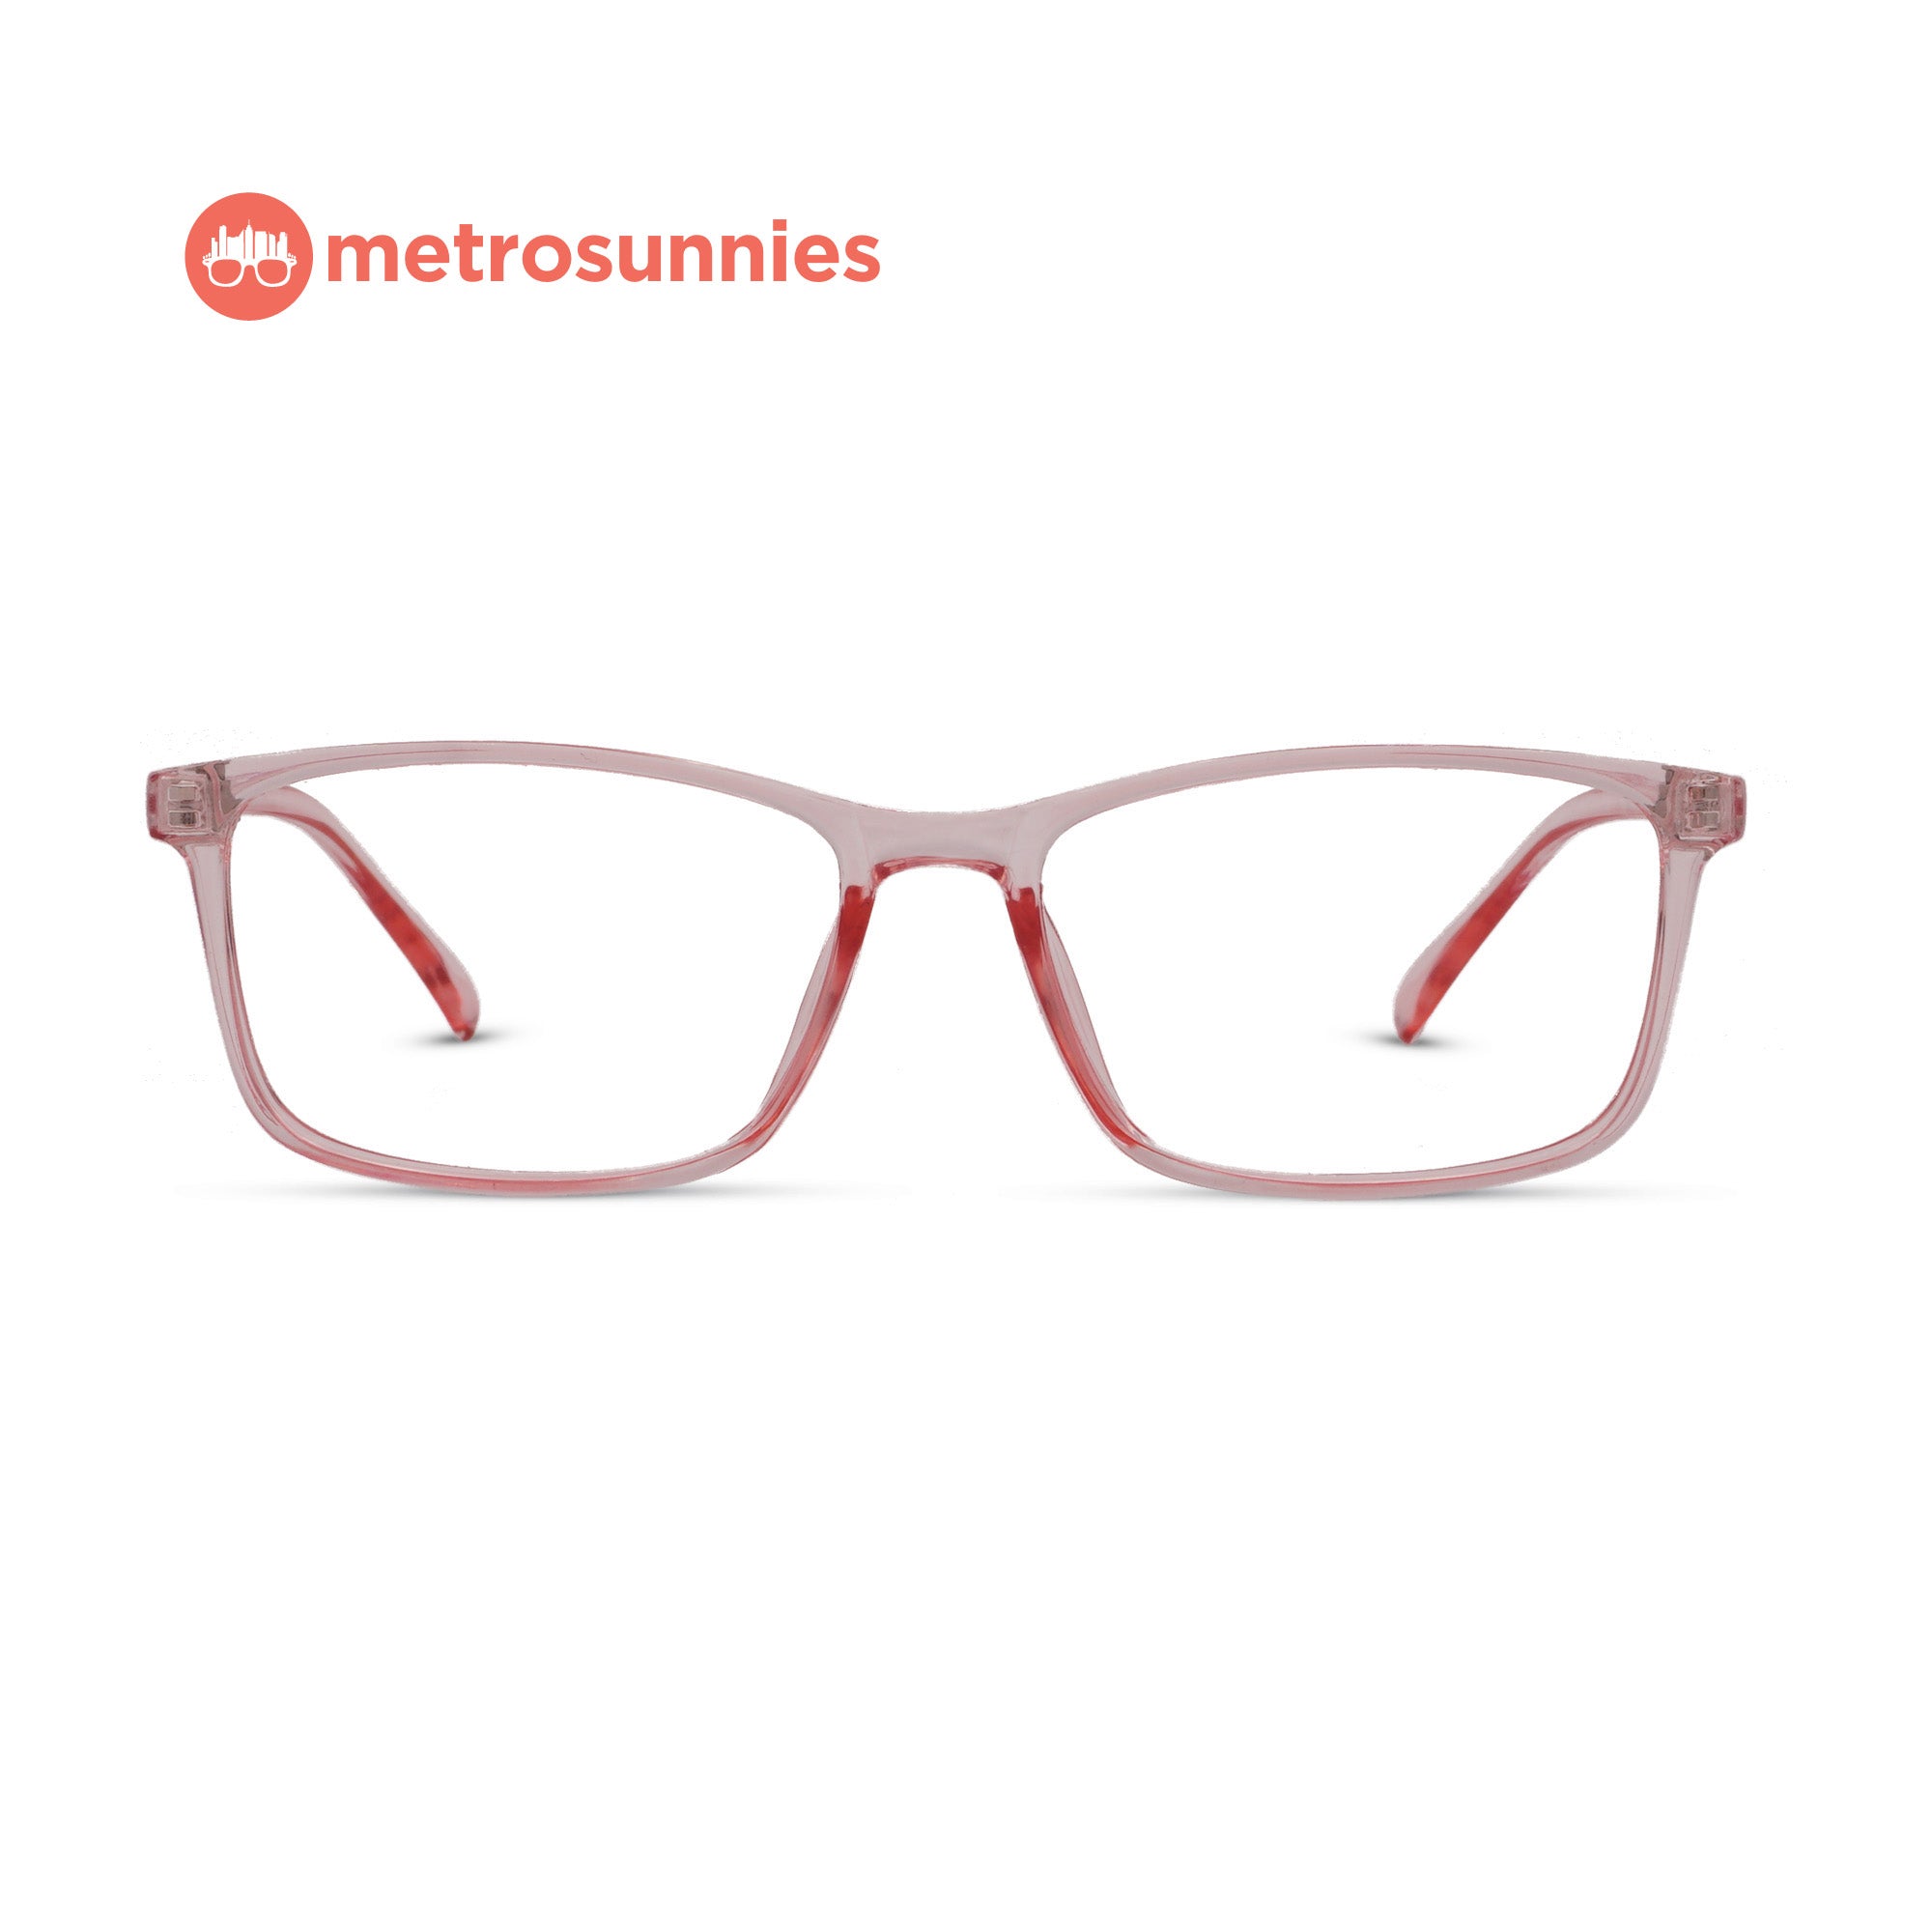 MetroSunnies Penny Specs (Blossom) / Replaceable Lens / Eyeglasses for Men and Women